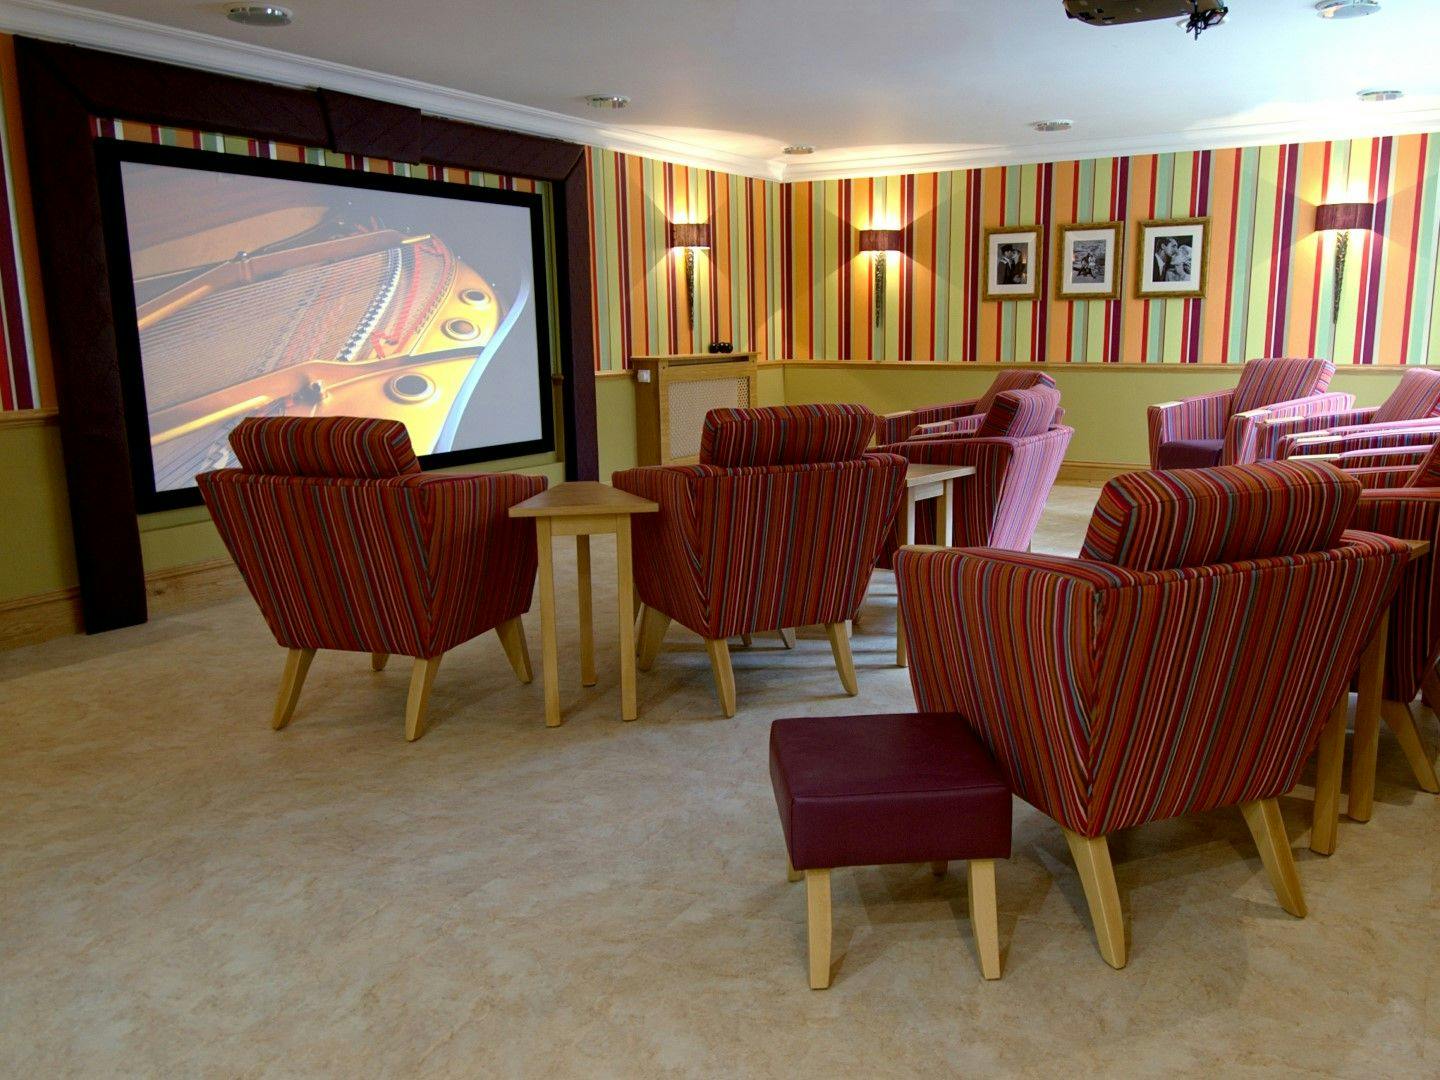 Cinema at Anya court Care Home in Rugby, Warwickshire